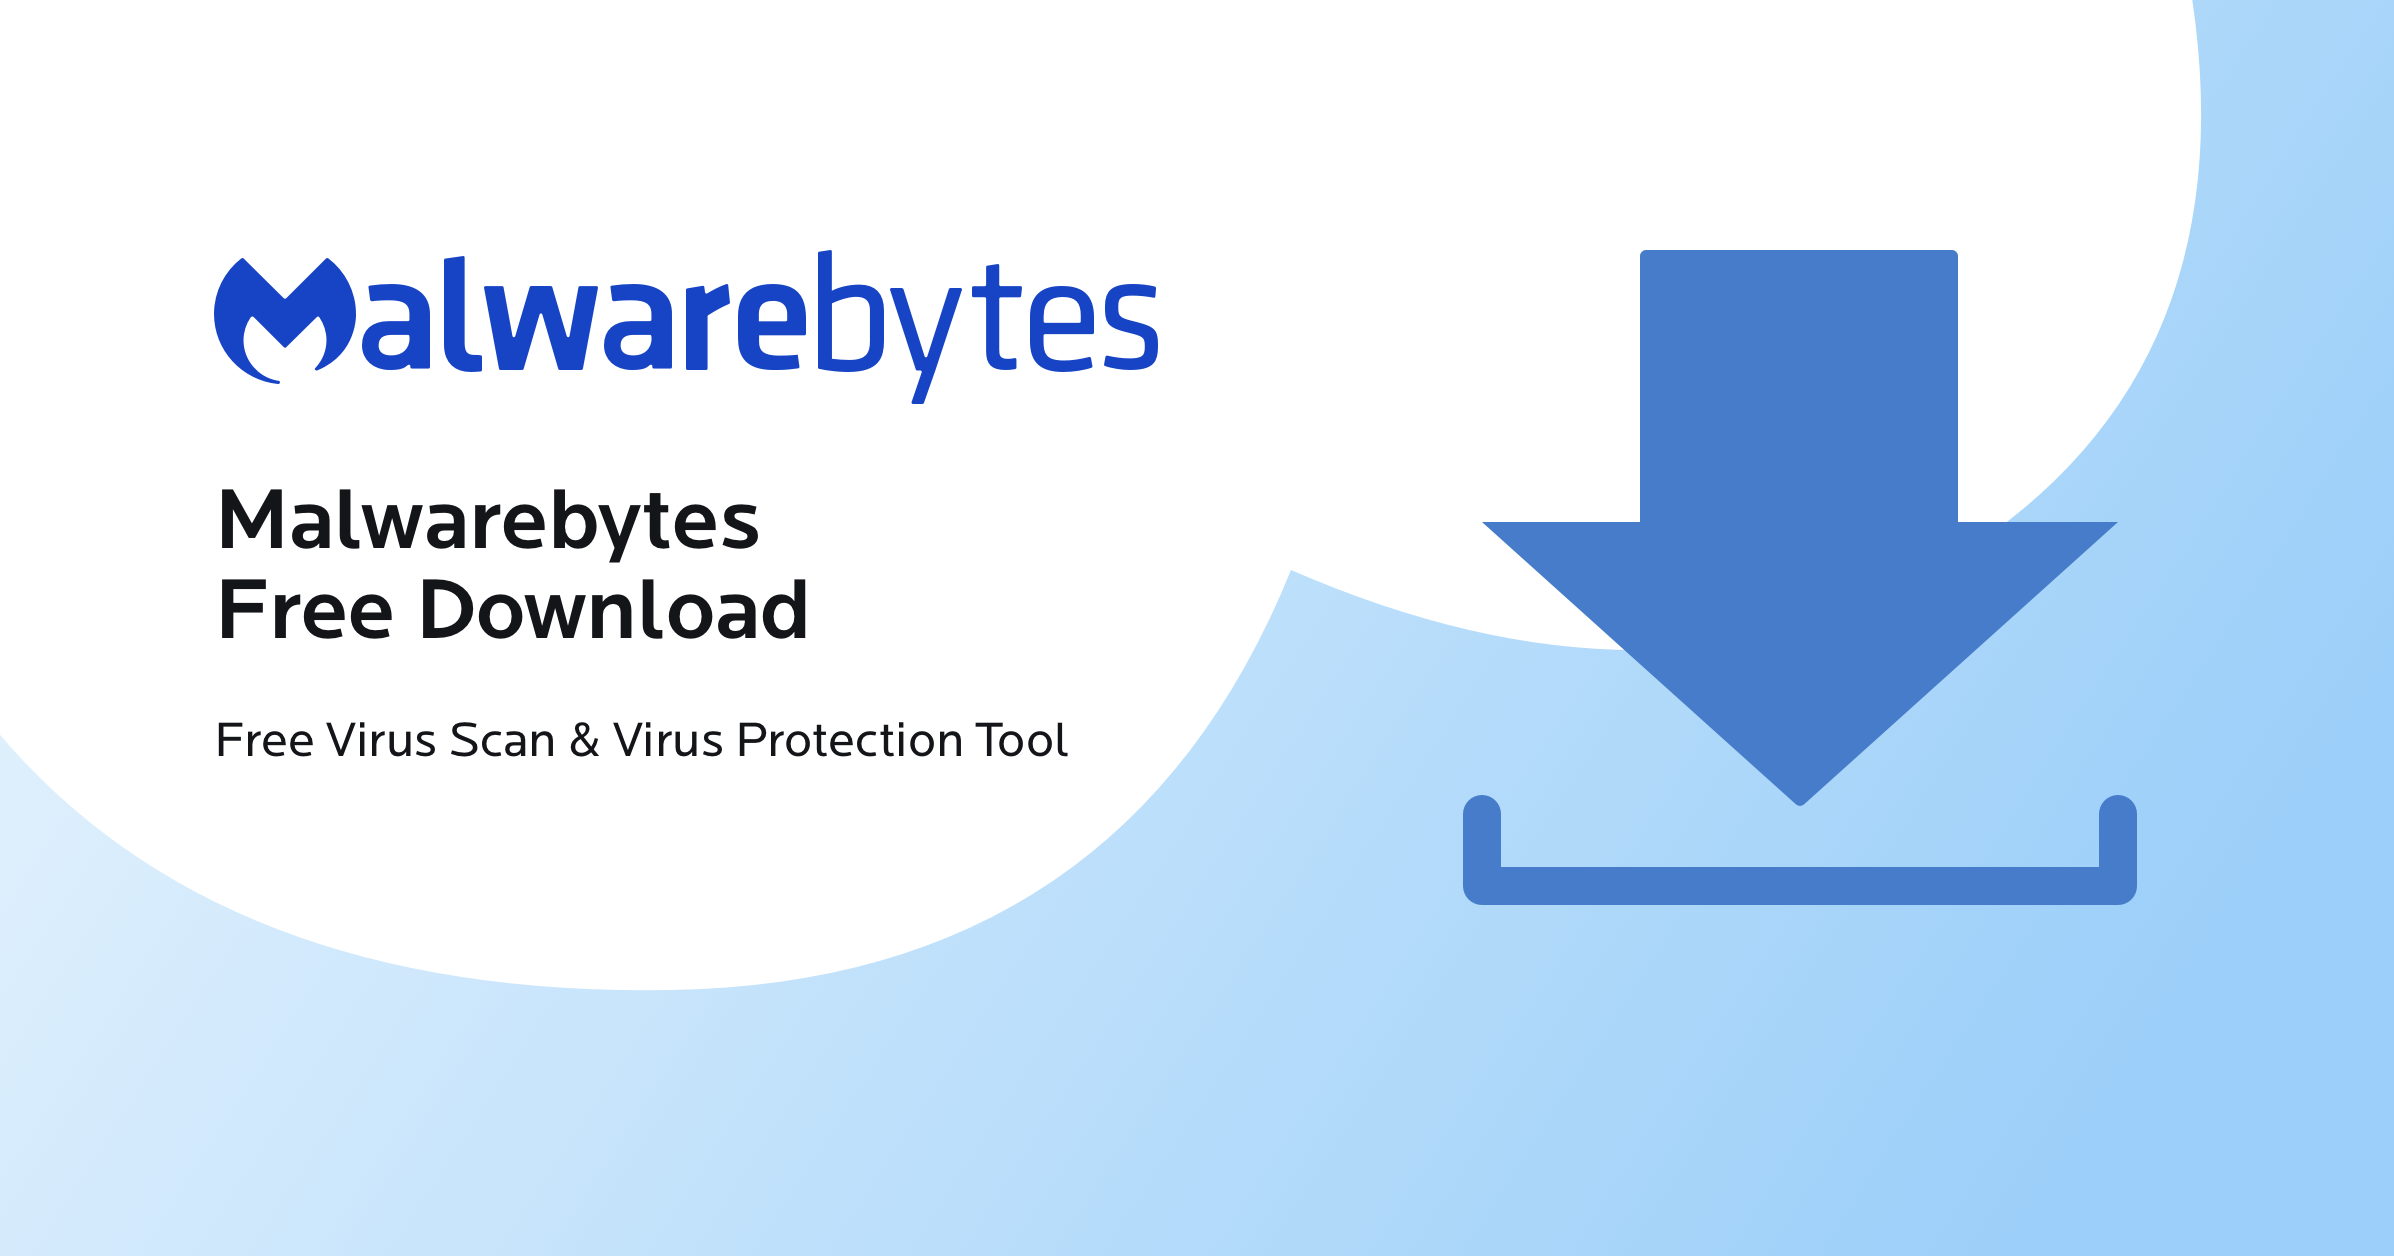 Download and install a reputable anti-malware program if you don't already have one.
Update the anti-malware software to ensure it has the latest definitions.